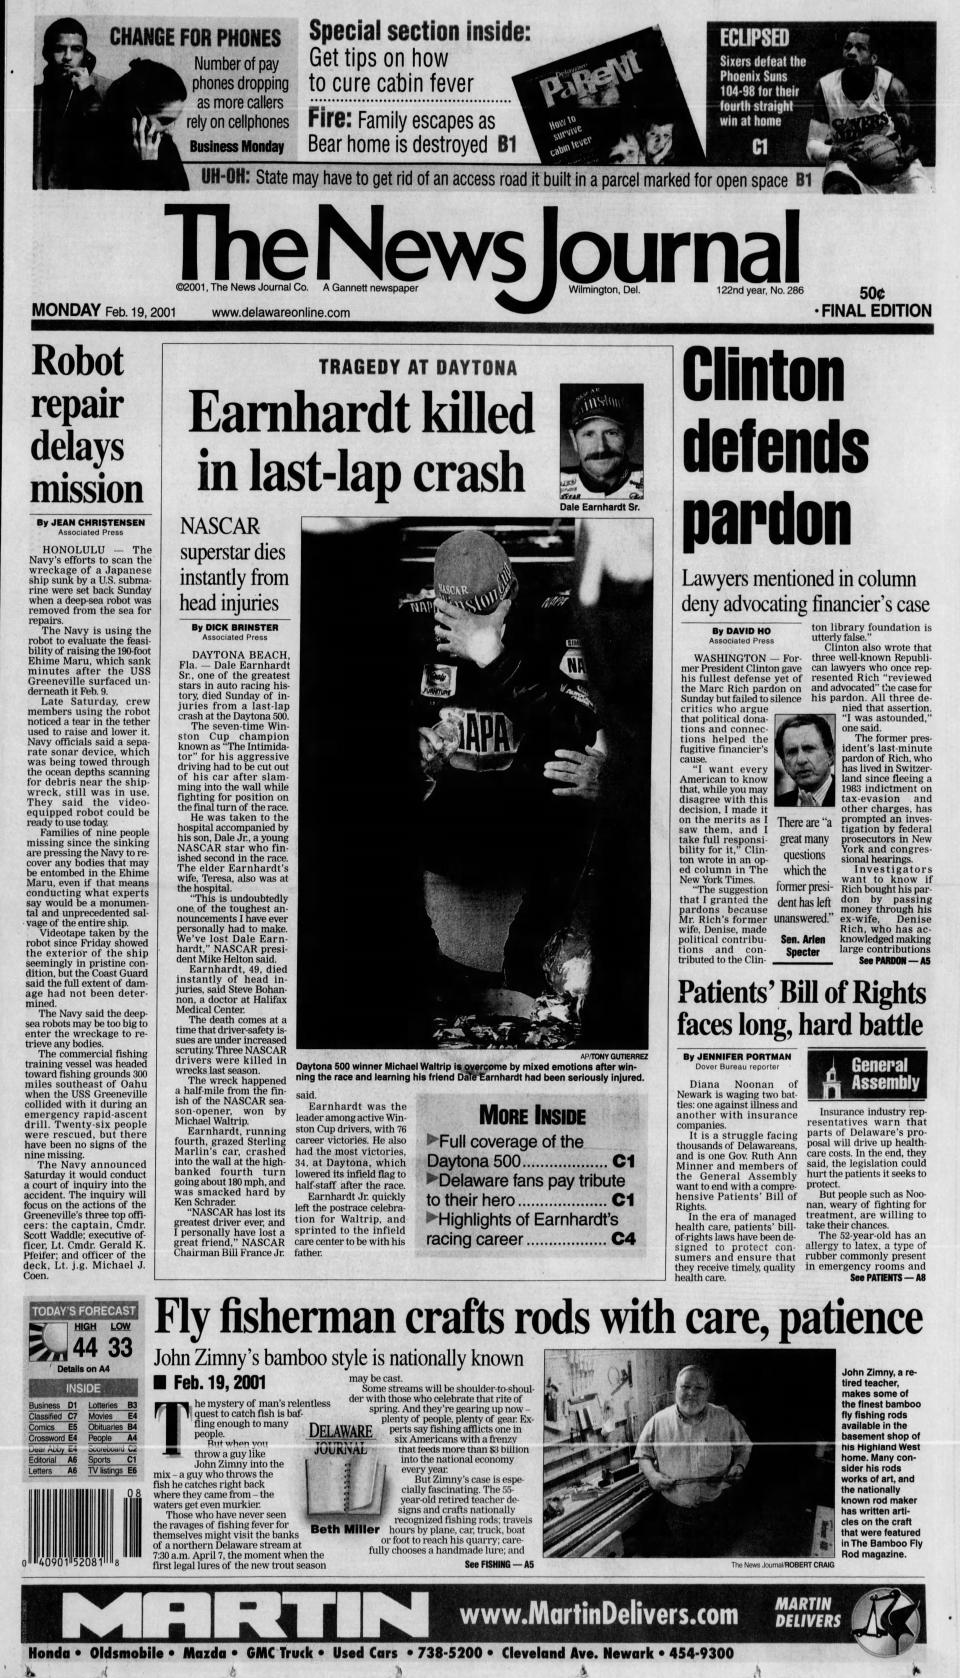 Front page of The News Journal from Feb. 19, 2001.